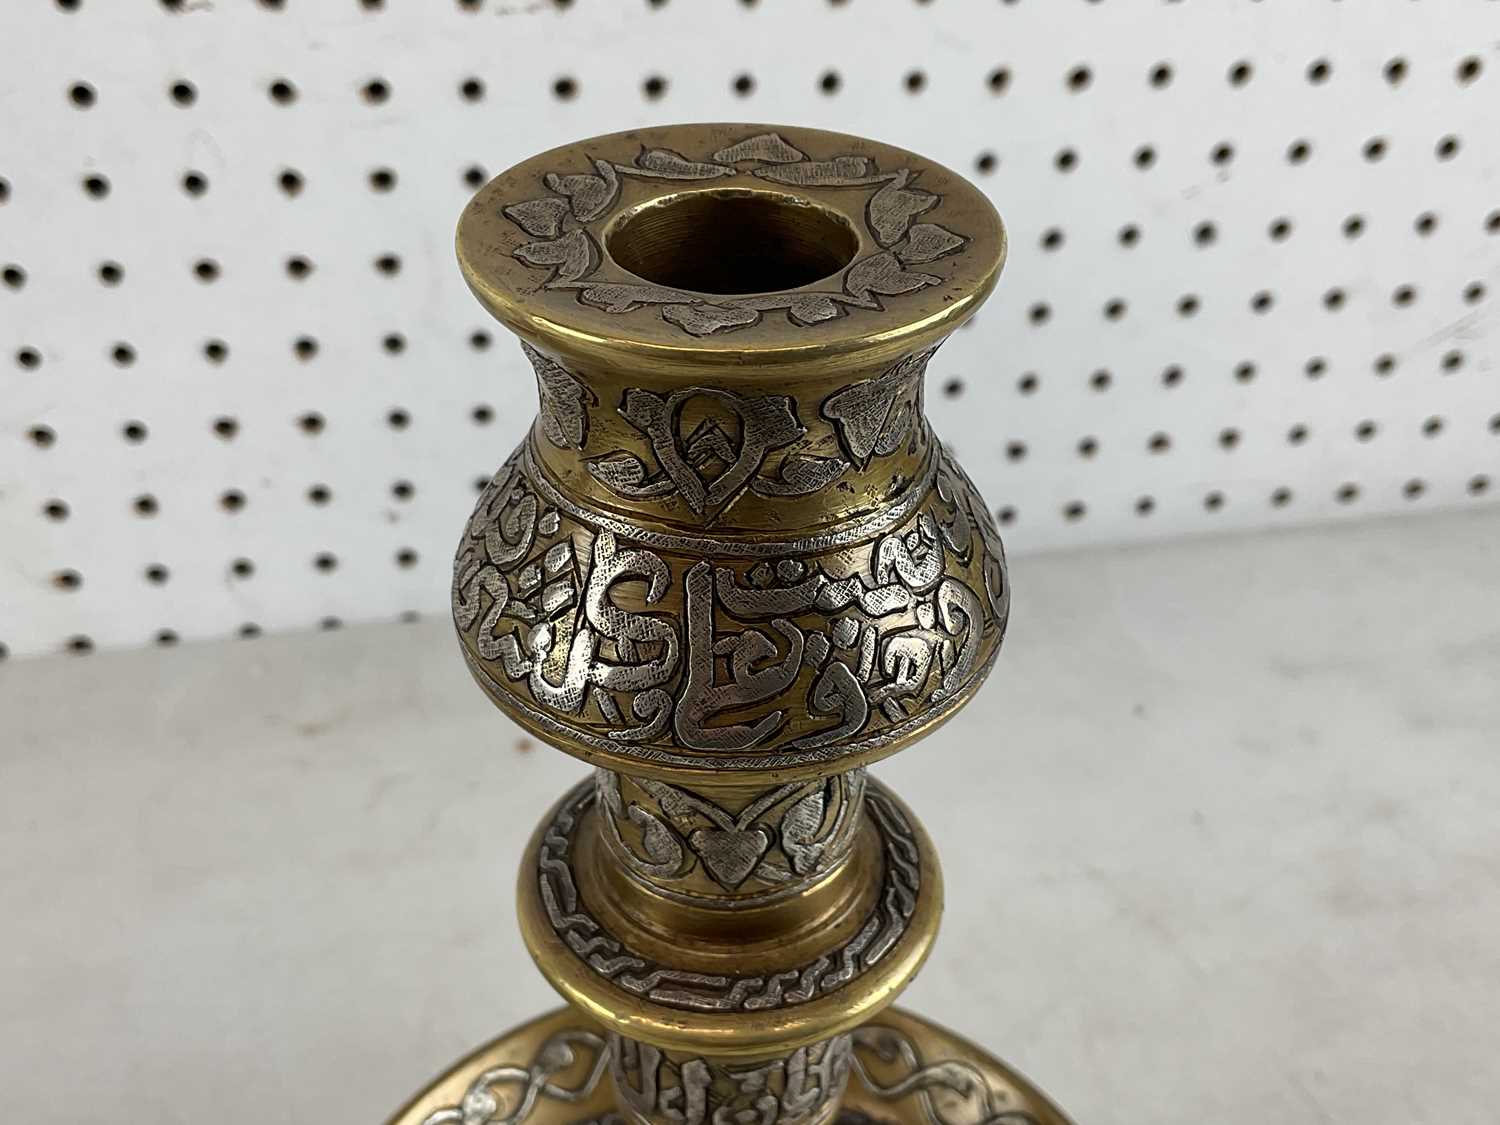 A pair of Islamic brass and silver inlaid candlesticks with Arabic calligraphy, height 30cm. - Image 3 of 3